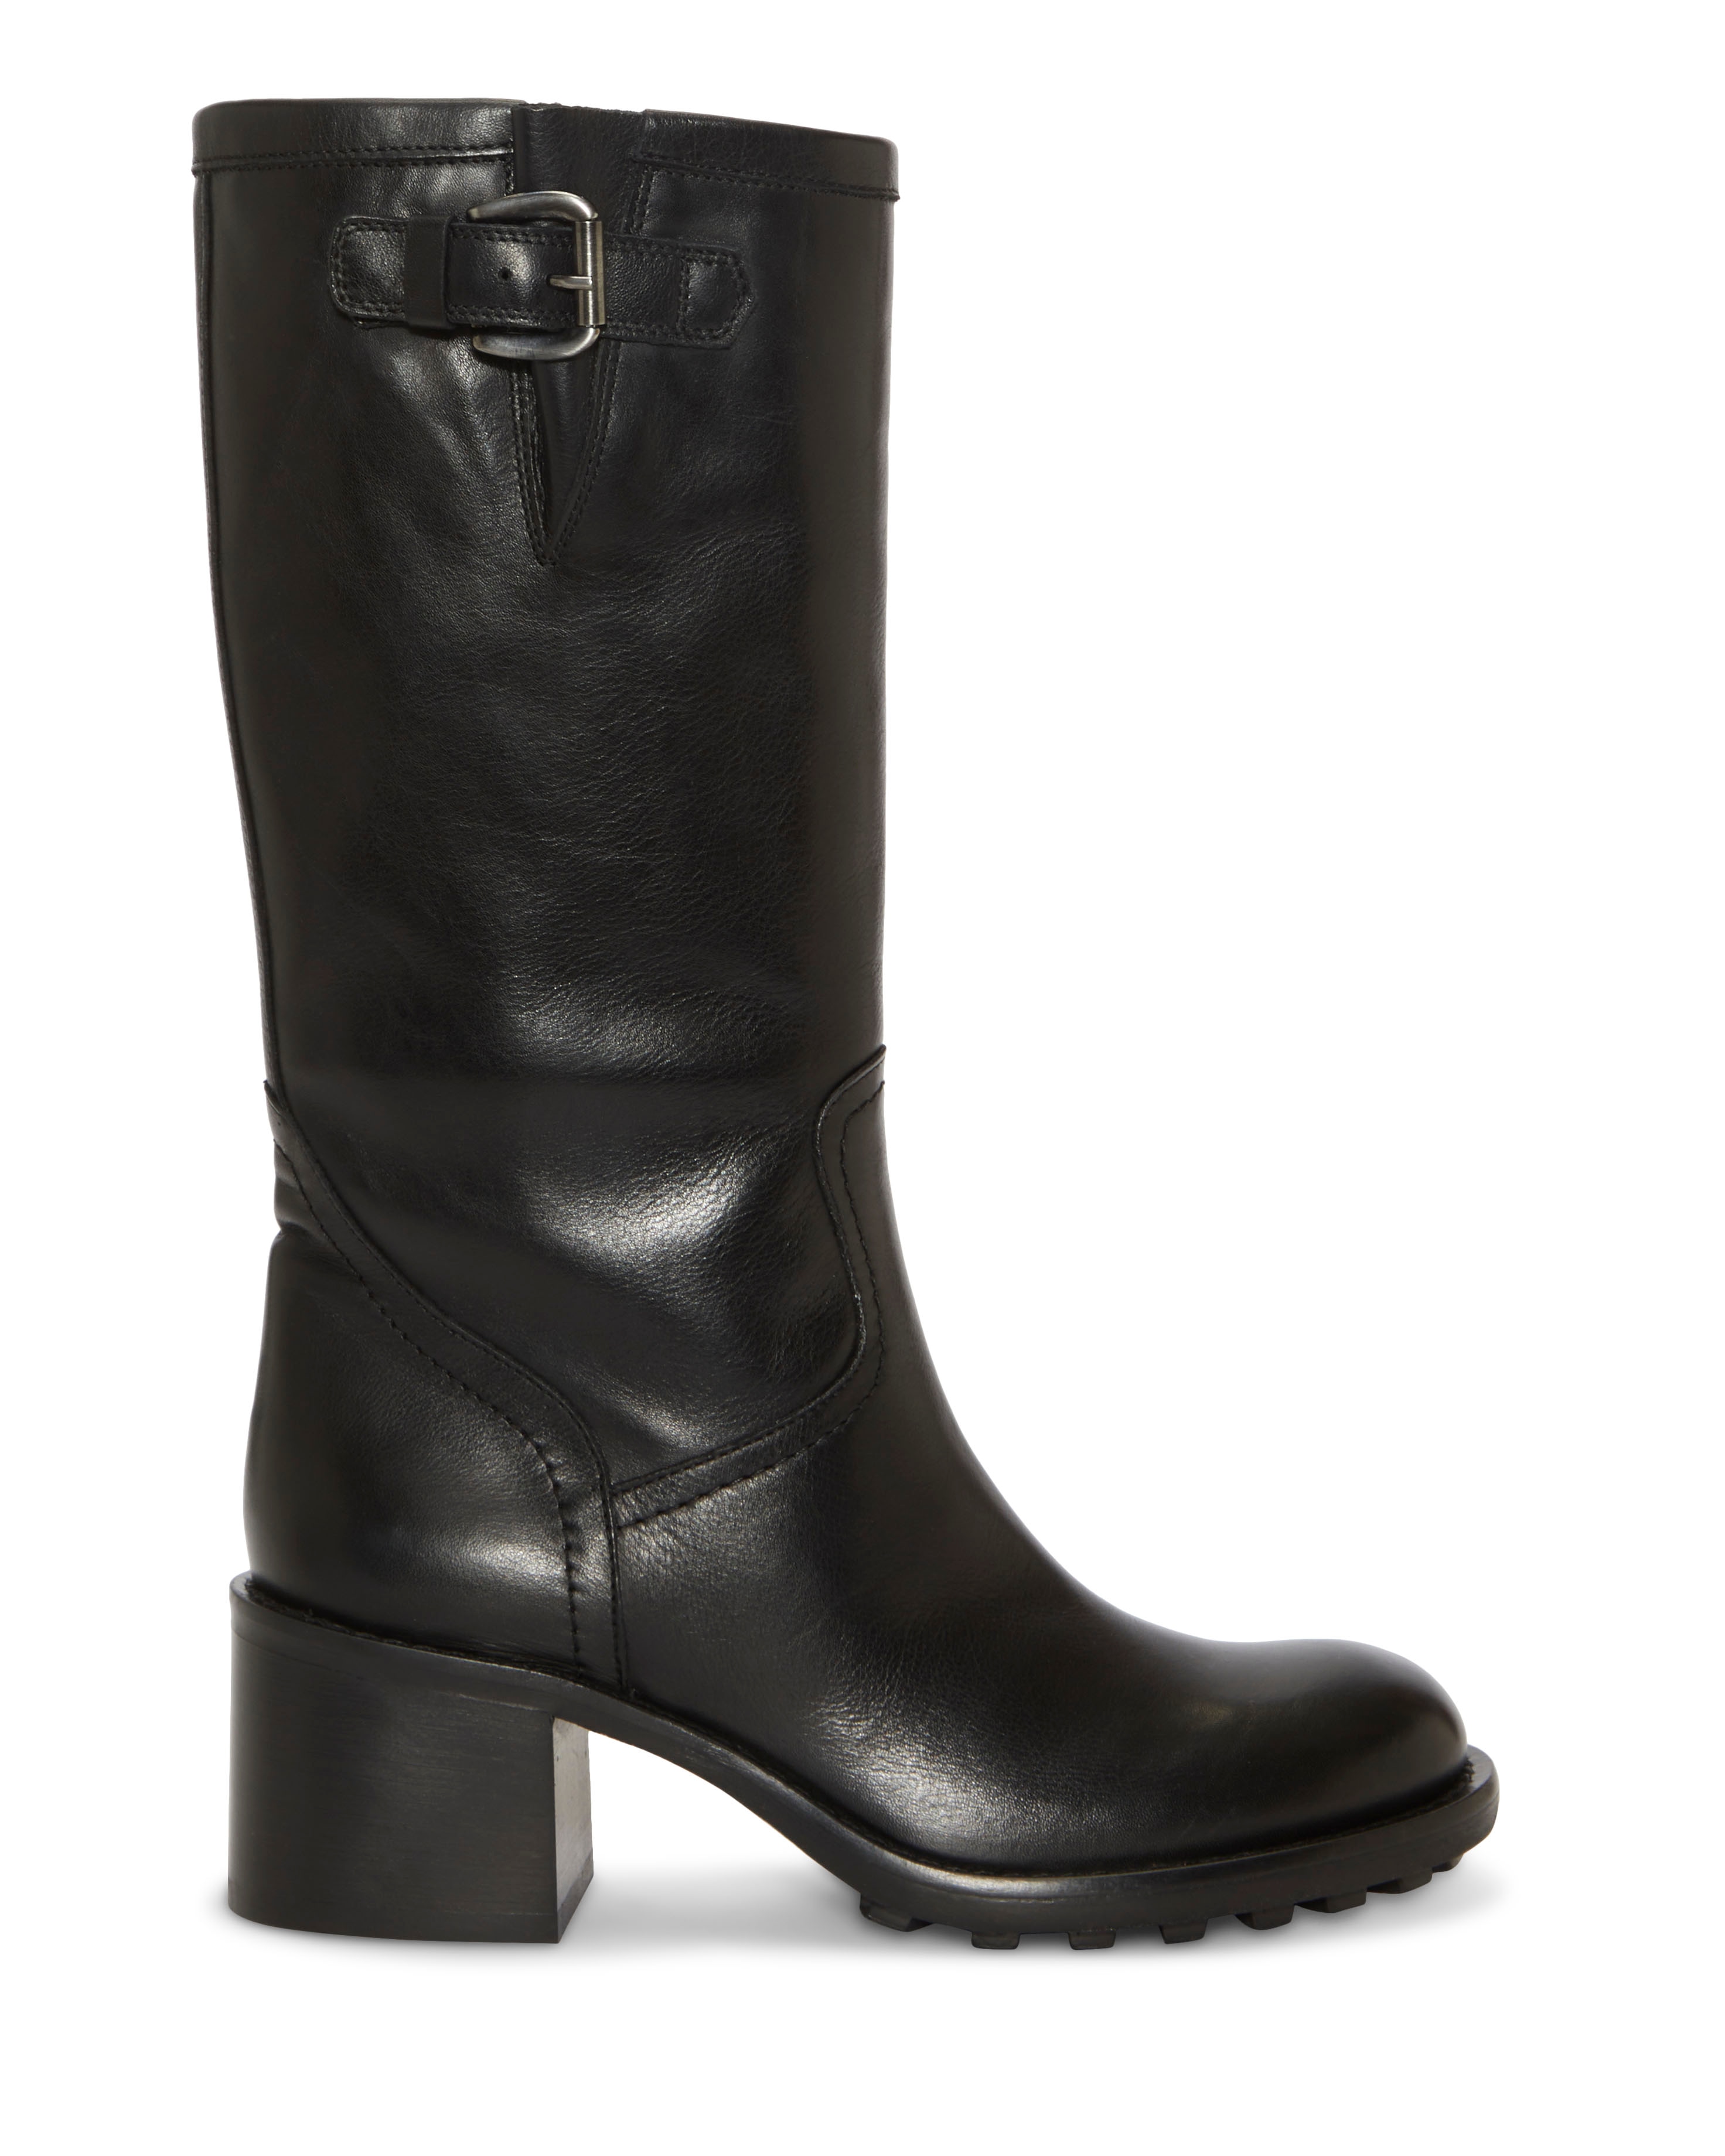 Vince Camuto Modisionn Boot